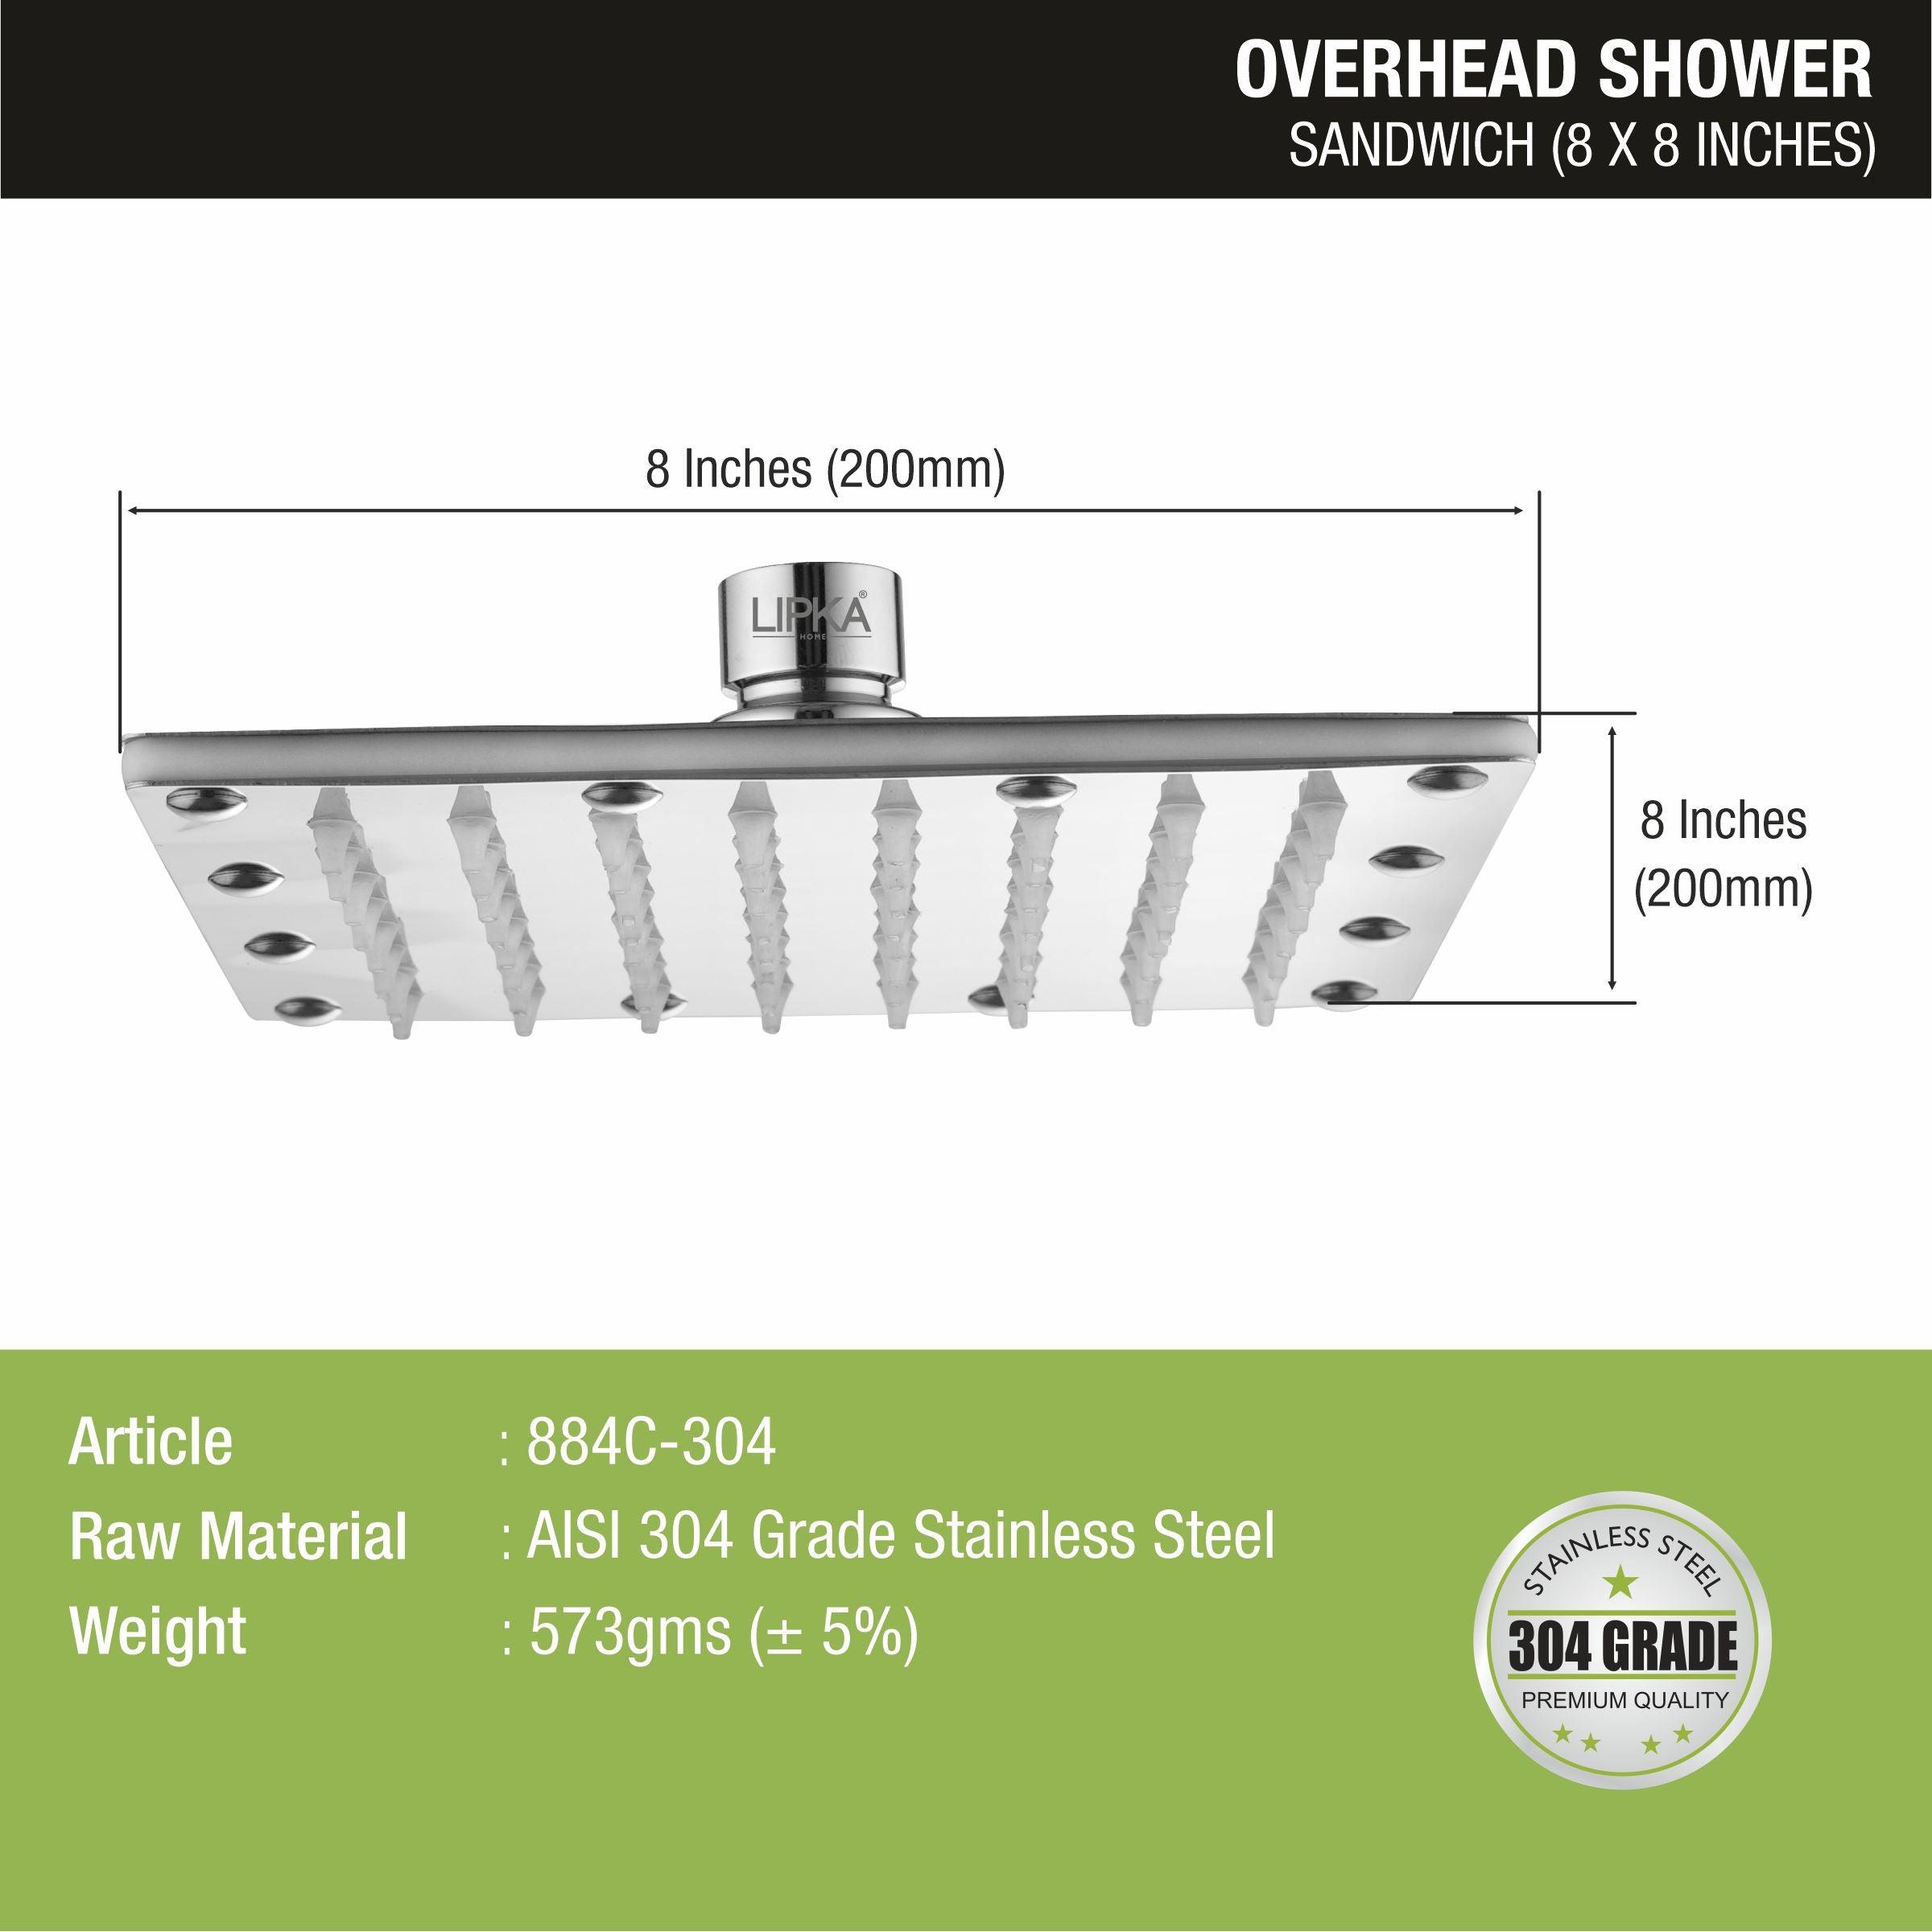 Sandwich 304-Grade Overhead Rain Shower (8 x 8 Inches) sizes and dimensions